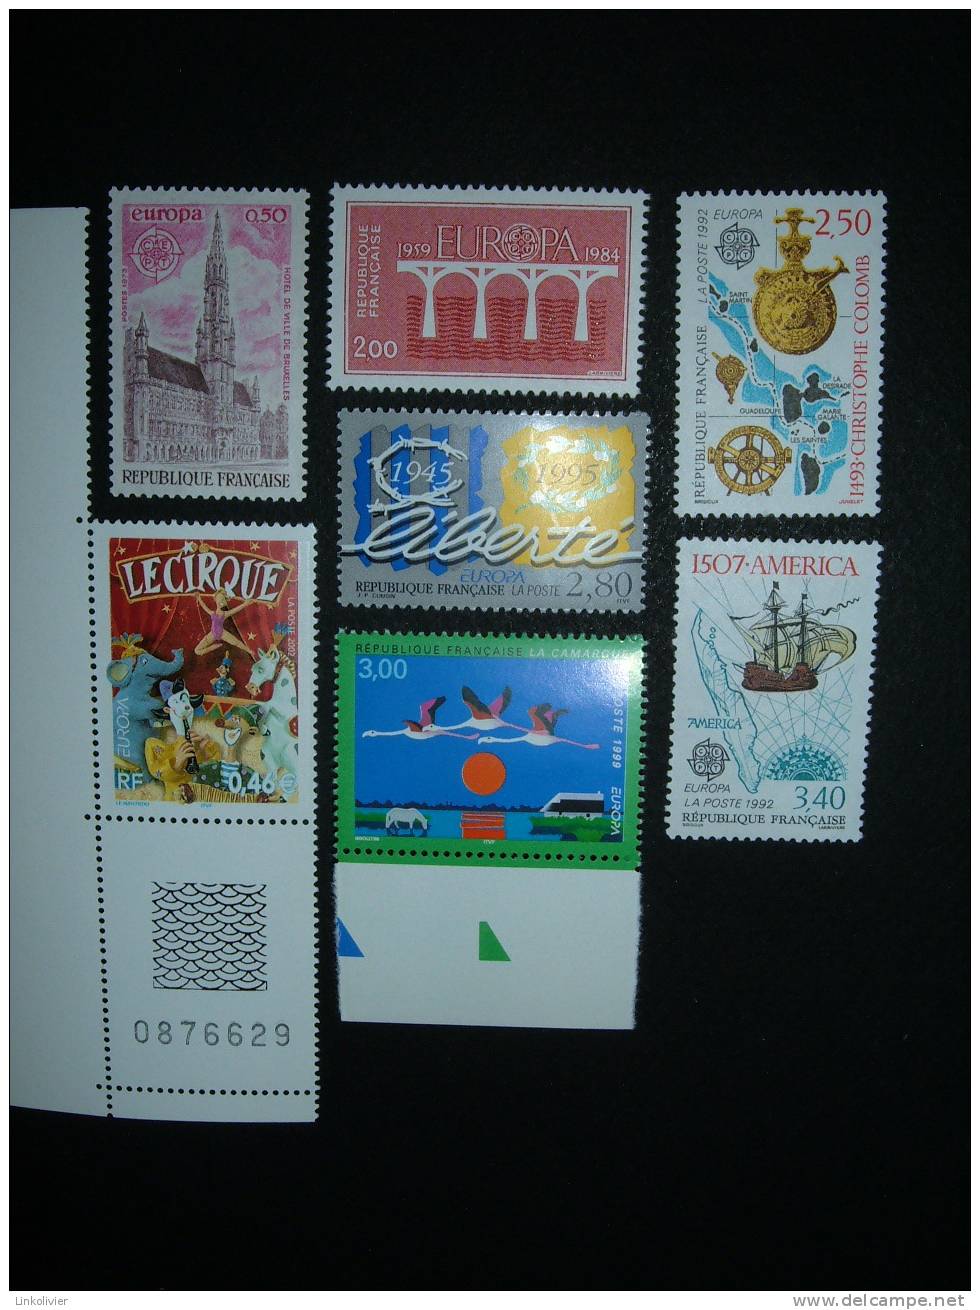 LOT 4 : FRANCE EUROPA -Y&T N° 1752 / 2309 / 2755 / 2756 / 2941 / 3240 / 3466 - Neuf** - Collections